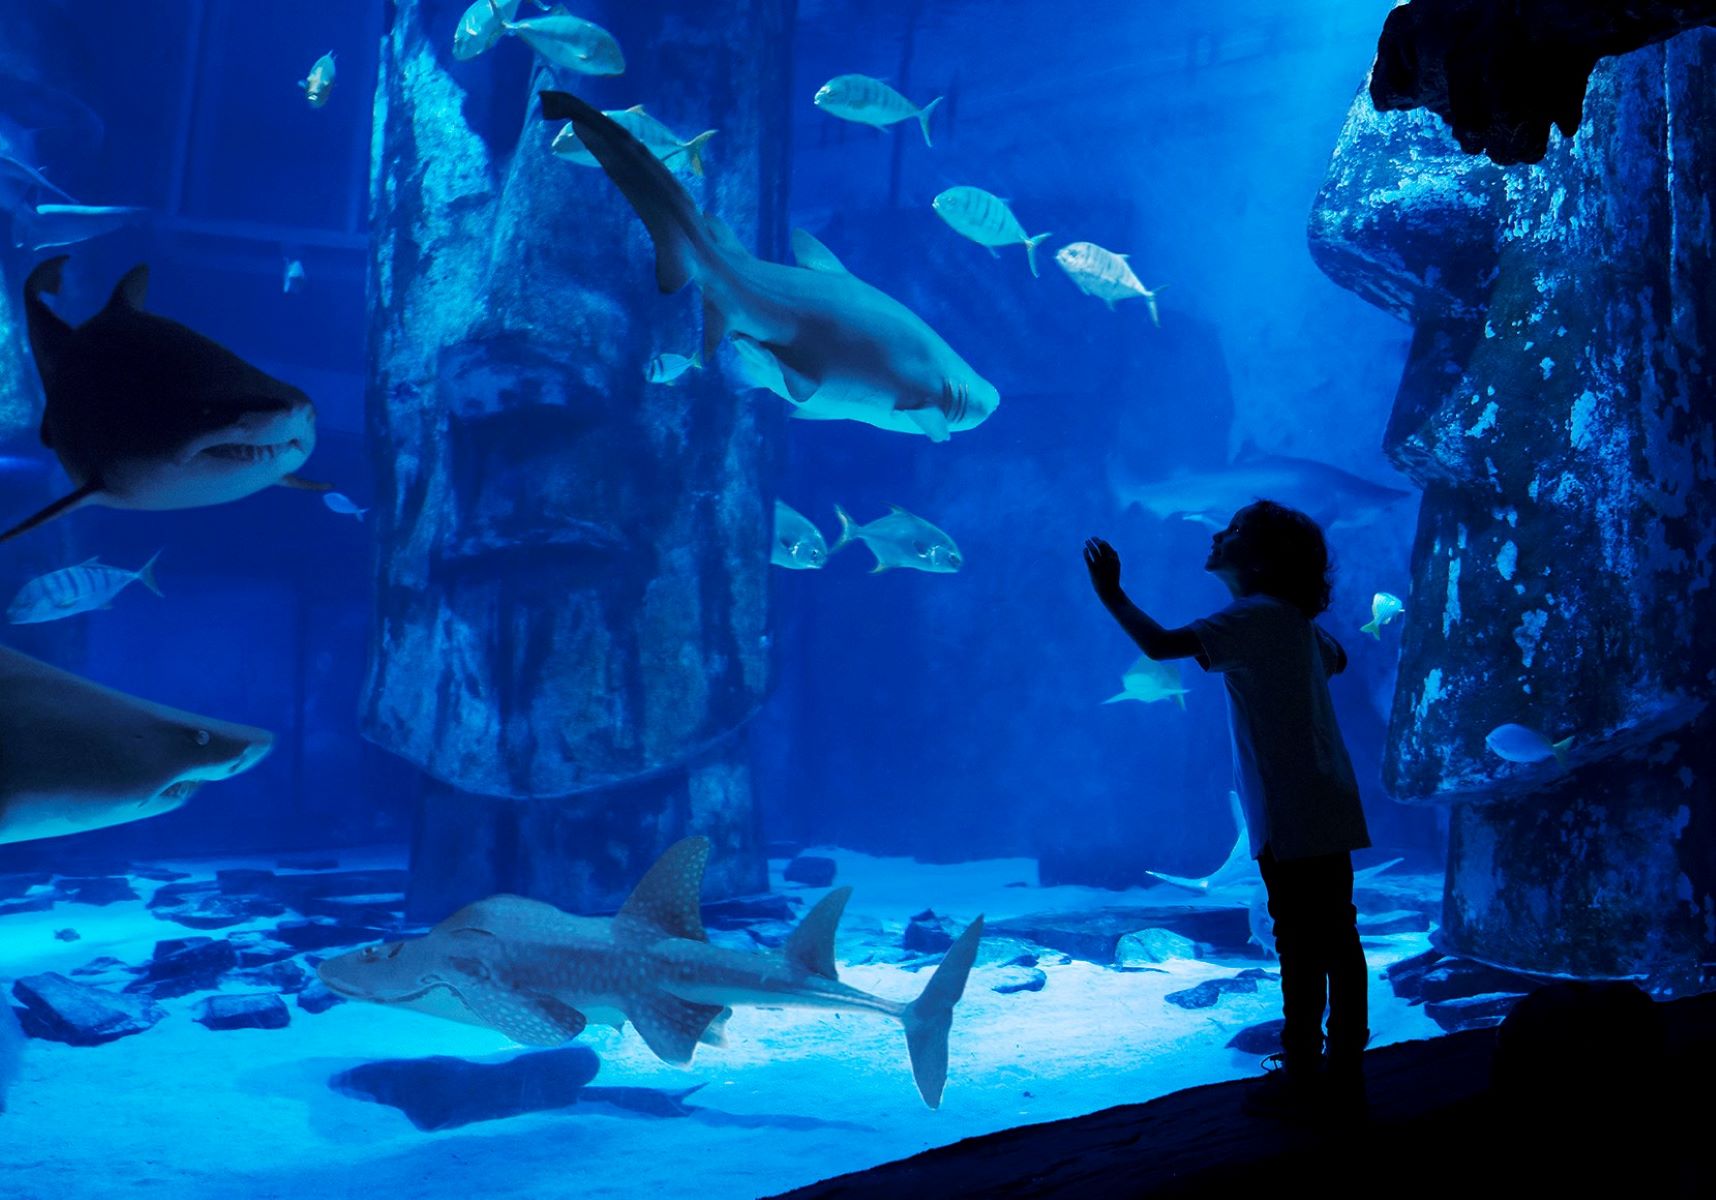 19 Intriguing Facts About Sea Life London Aquarium - Facts.net